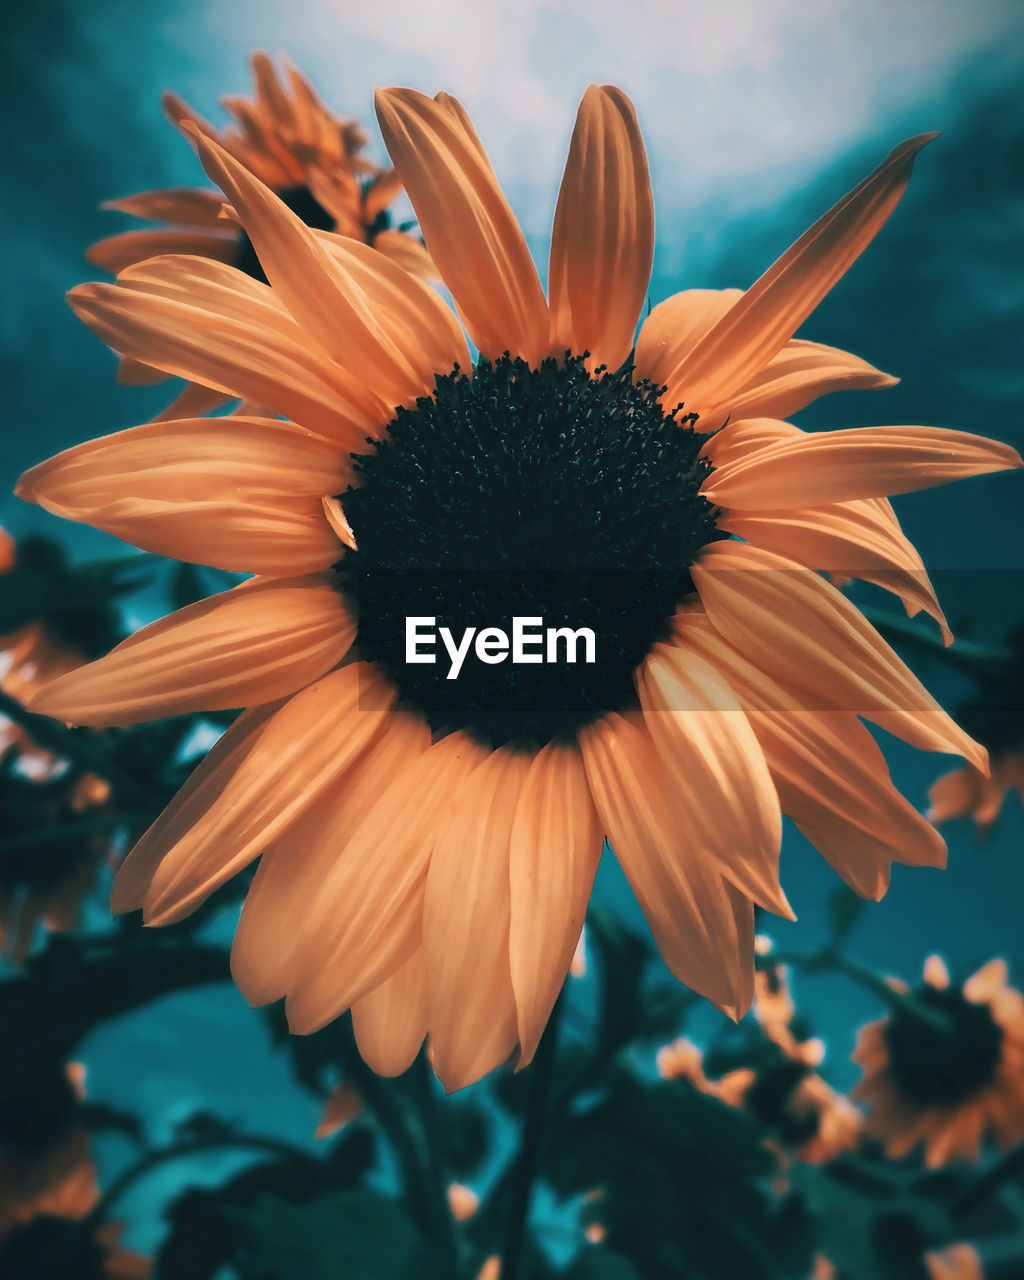 flowering plant, flower, plant, freshness, beauty in nature, flower head, petal, inflorescence, growth, fragility, close-up, macro photography, nature, pollen, focus on foreground, no people, yellow, outdoors, sunflower, botany, orange color, plant stem, day, sky, blossom